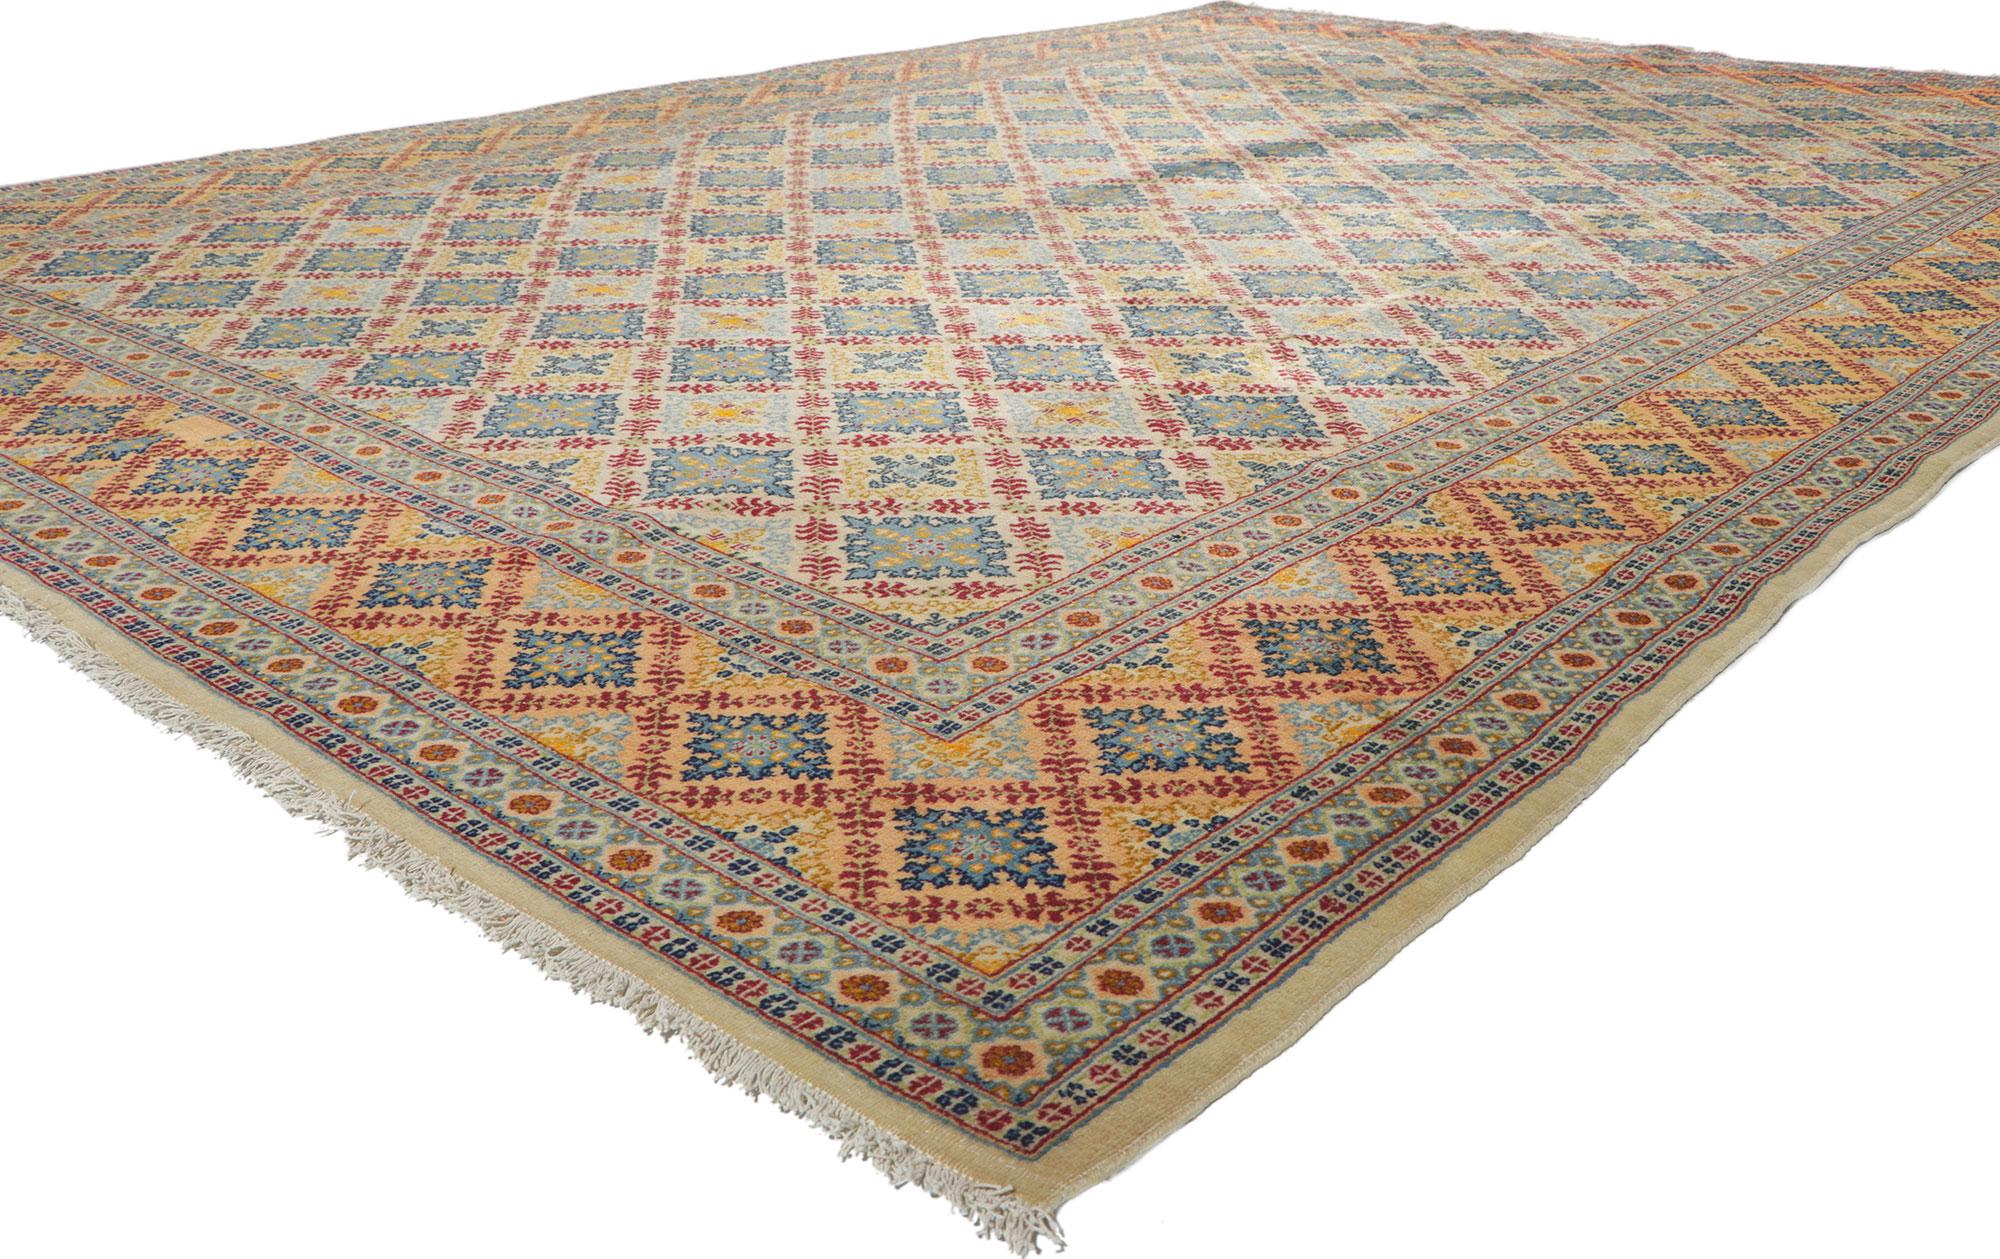 61034 Vintage Persian Isfahan Rug, 08'06 x 11'09. Embark on an enchanting odyssey of Moorish elegance with each step upon this hand-knotted wool vintage Persian Isfahan rug. This magical carpet ride is a voyage into a world awash with hues